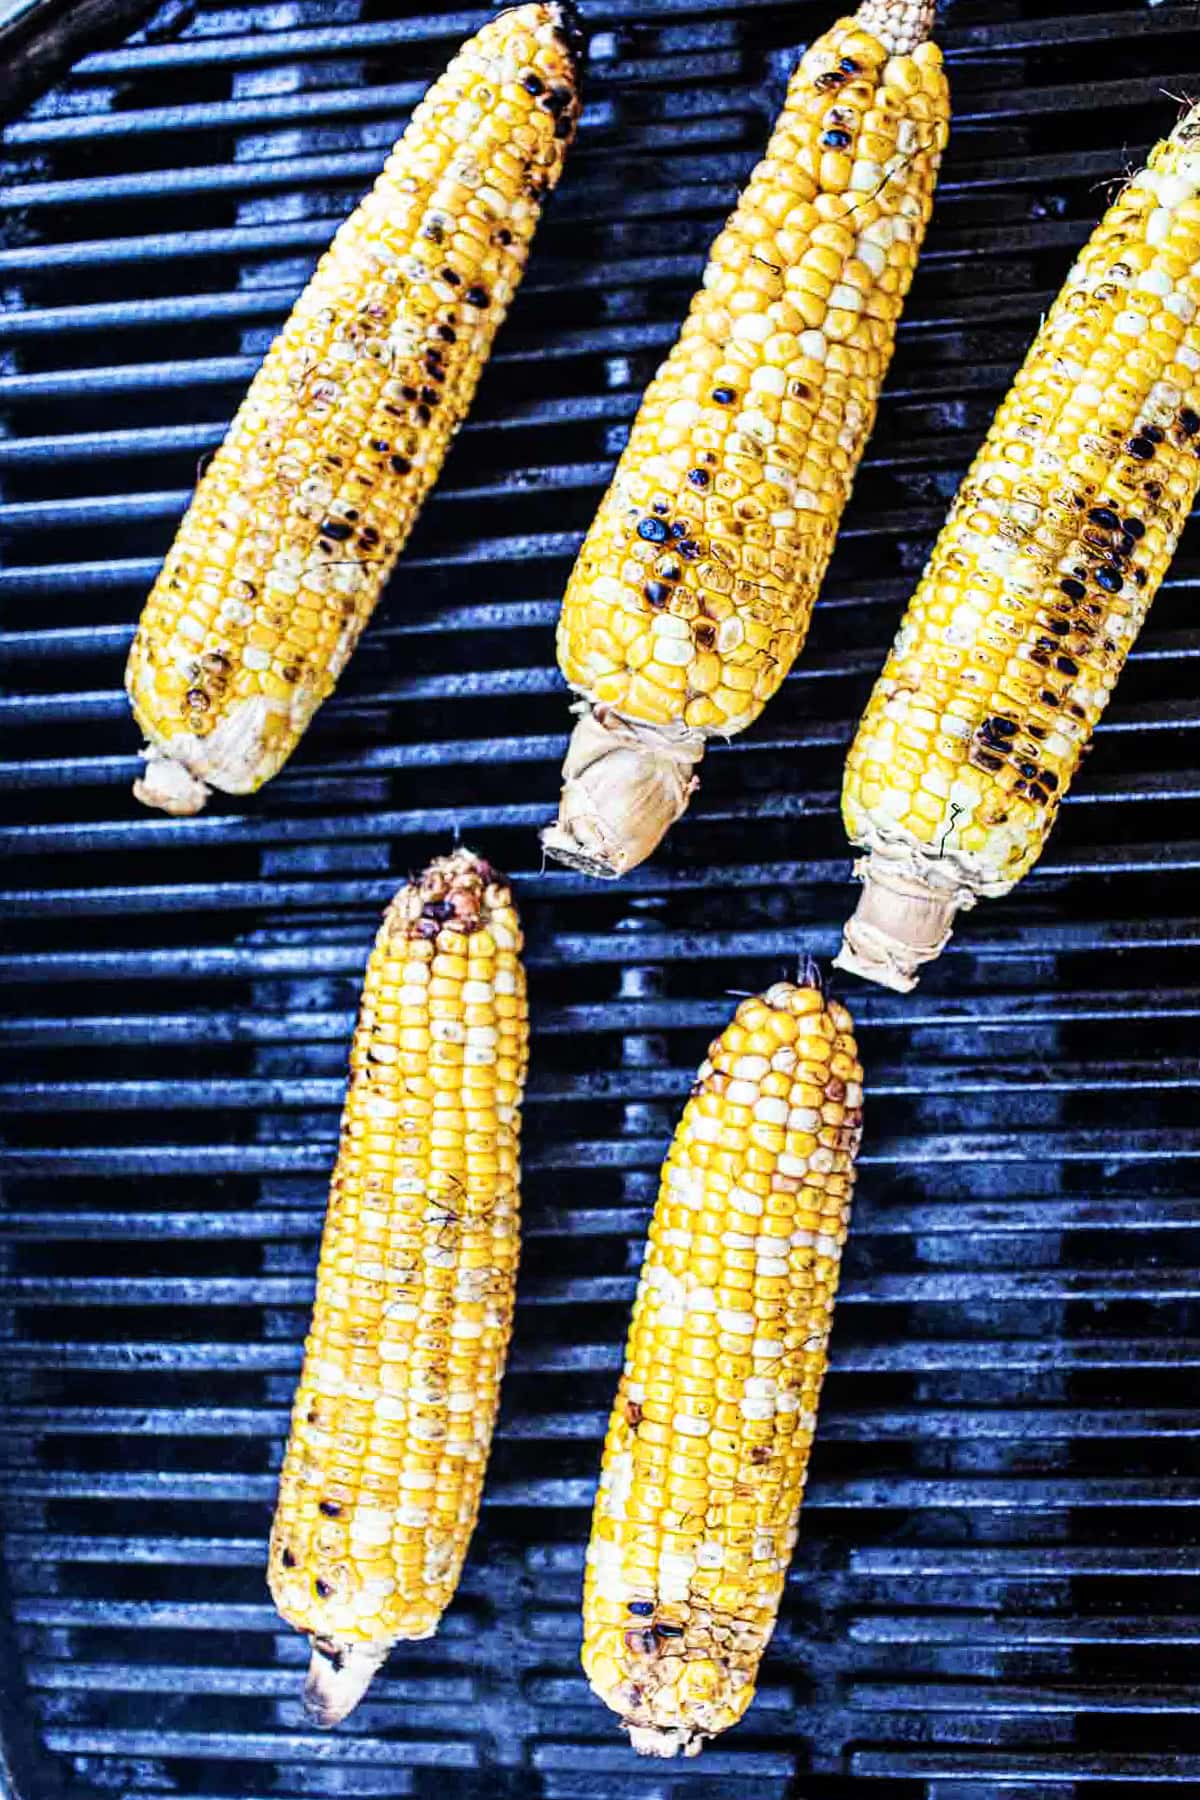 5 corn cobs on a grill